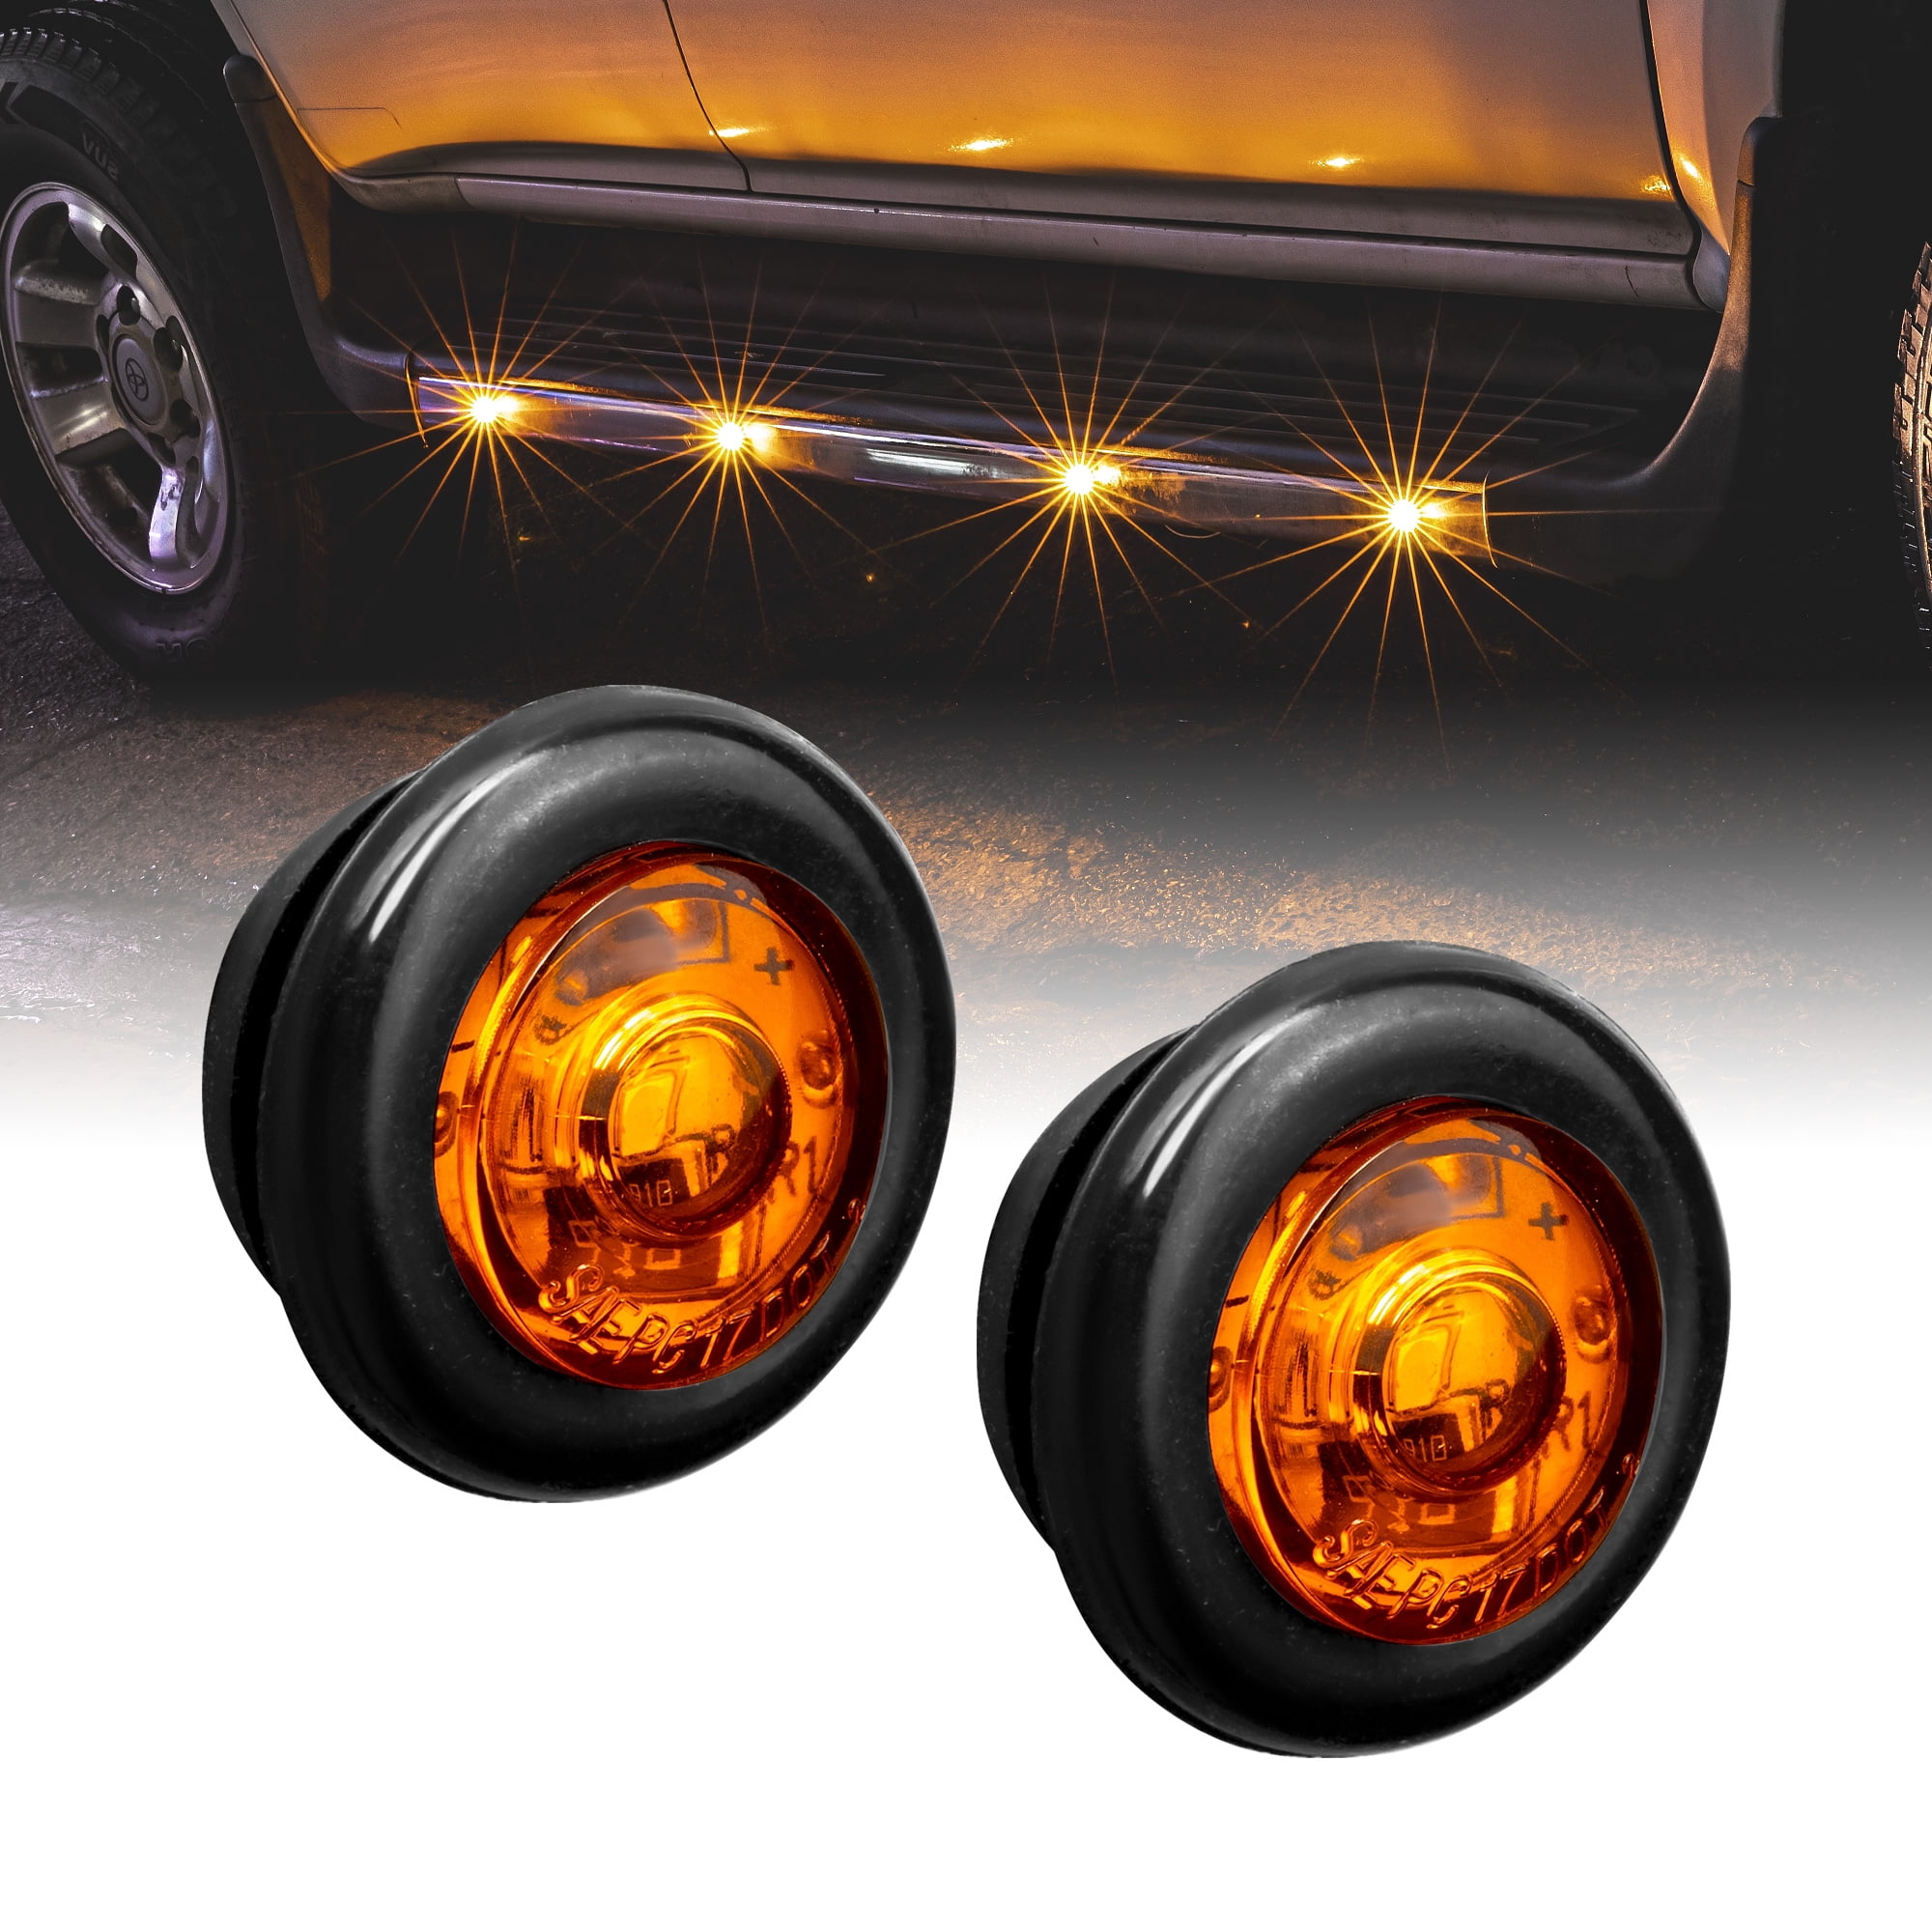 2pc 3/4" Round DOT P2PC Amber LED Bullet Clearance Marker Lights for Trailer 